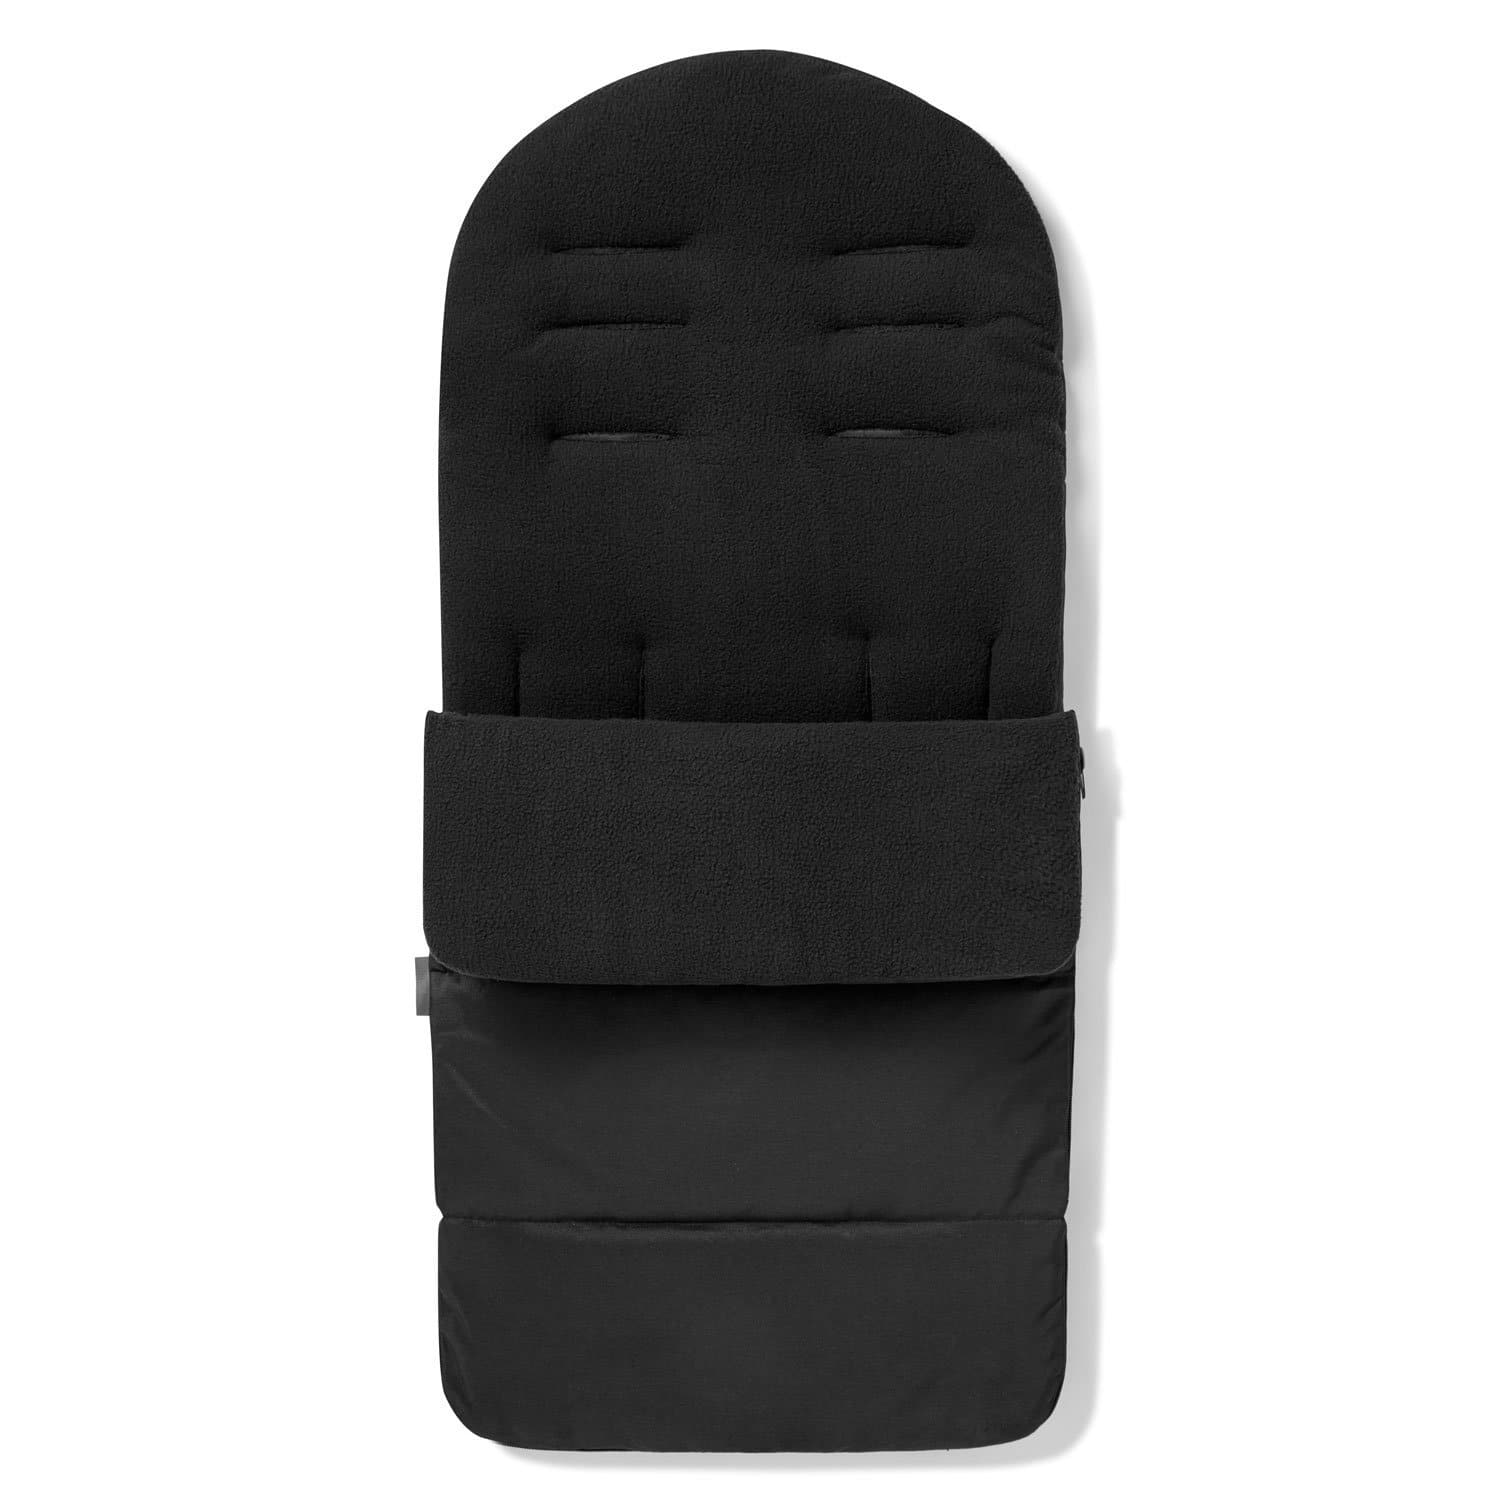 Premium Footmuff / Cosy Toes Compatible with Recaro - Black Jack / Fits All Models | For Your Little One